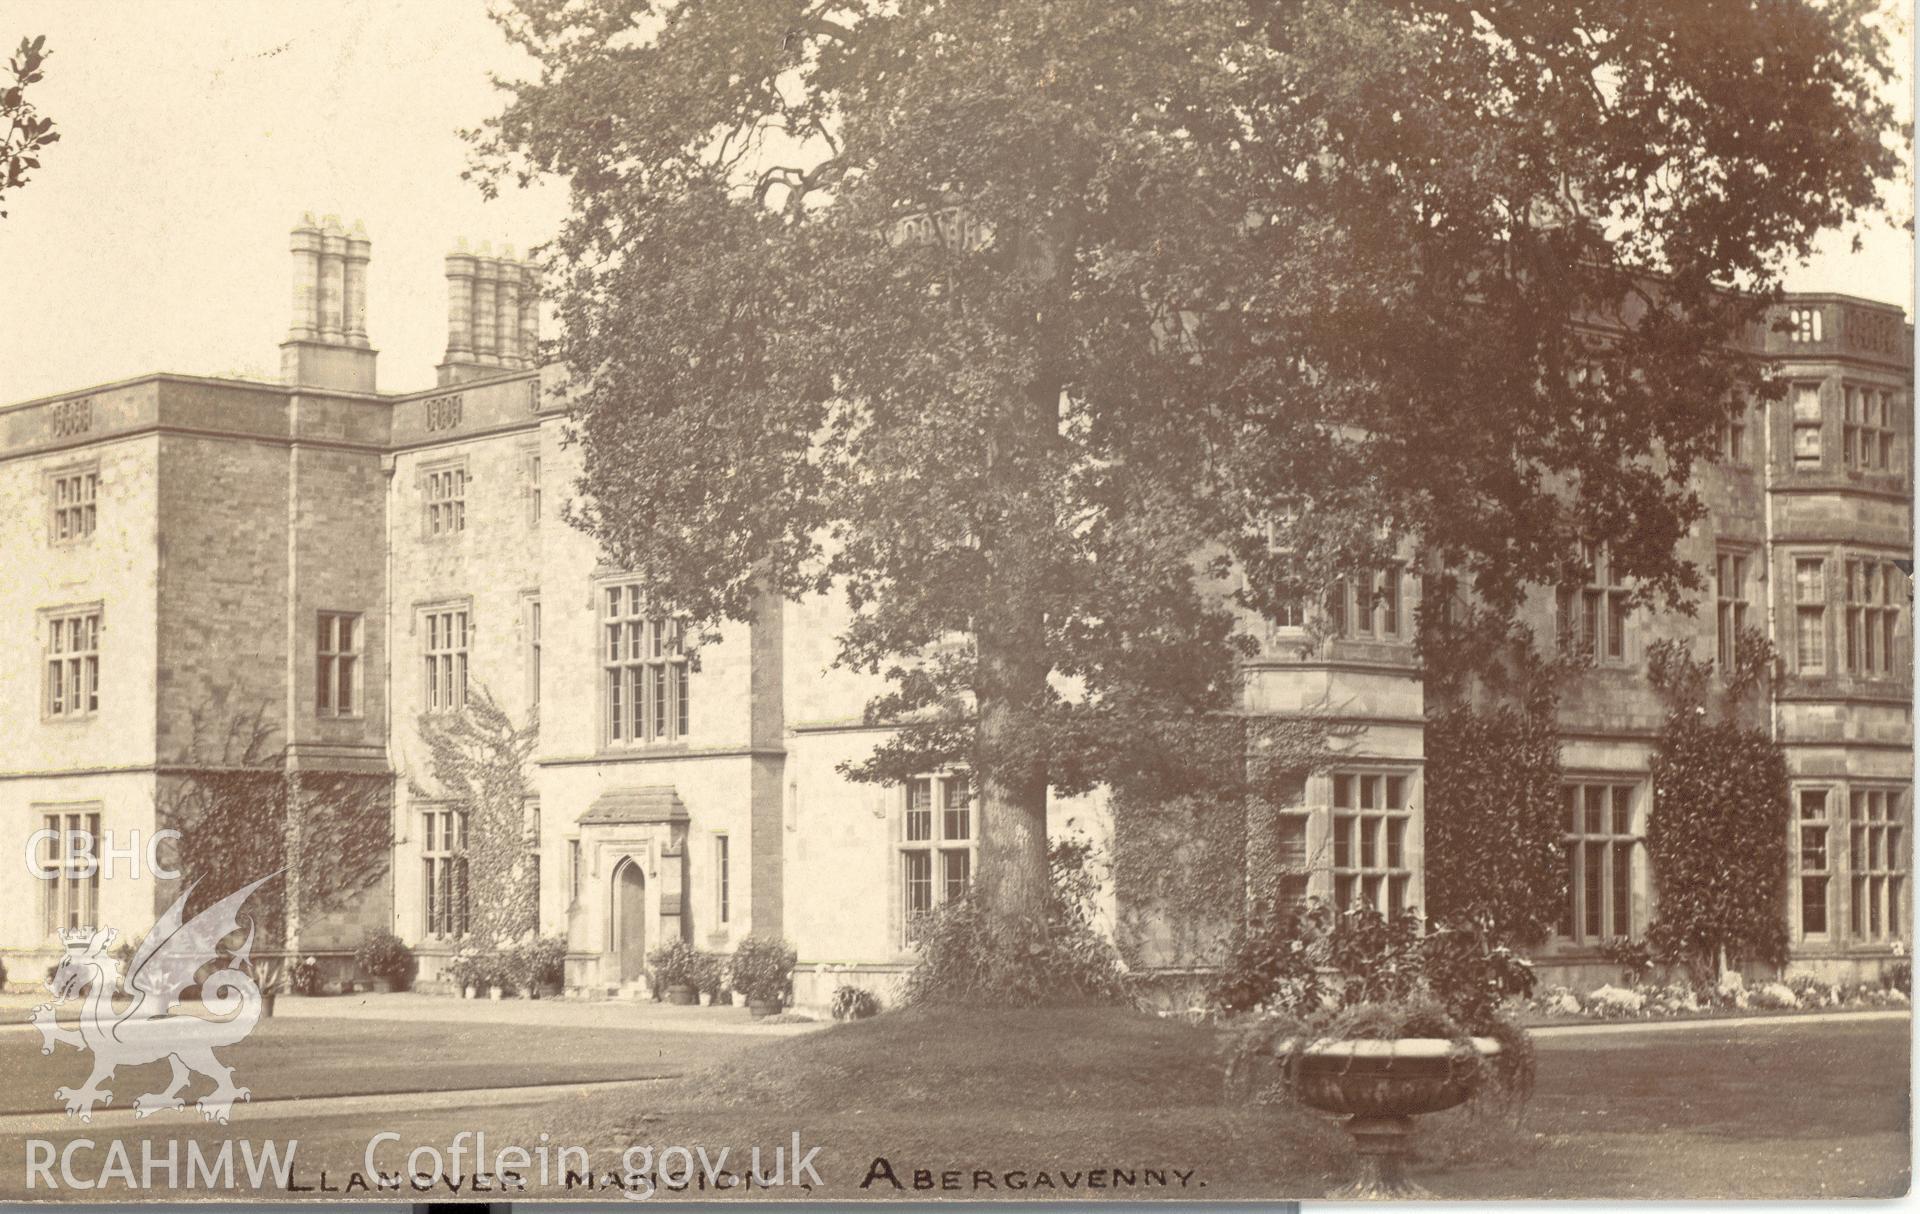 Digitised postcard image of Llanover House, Llanover. Produced by Parks and Gardens Data Services, from an original item in the Peter Davis Collection at Parks and Gardens UK. We hold only web-resolution images of this collection, suitable for viewing on screen and for research purposes only. We do not hold the original images, or publication quality scans.